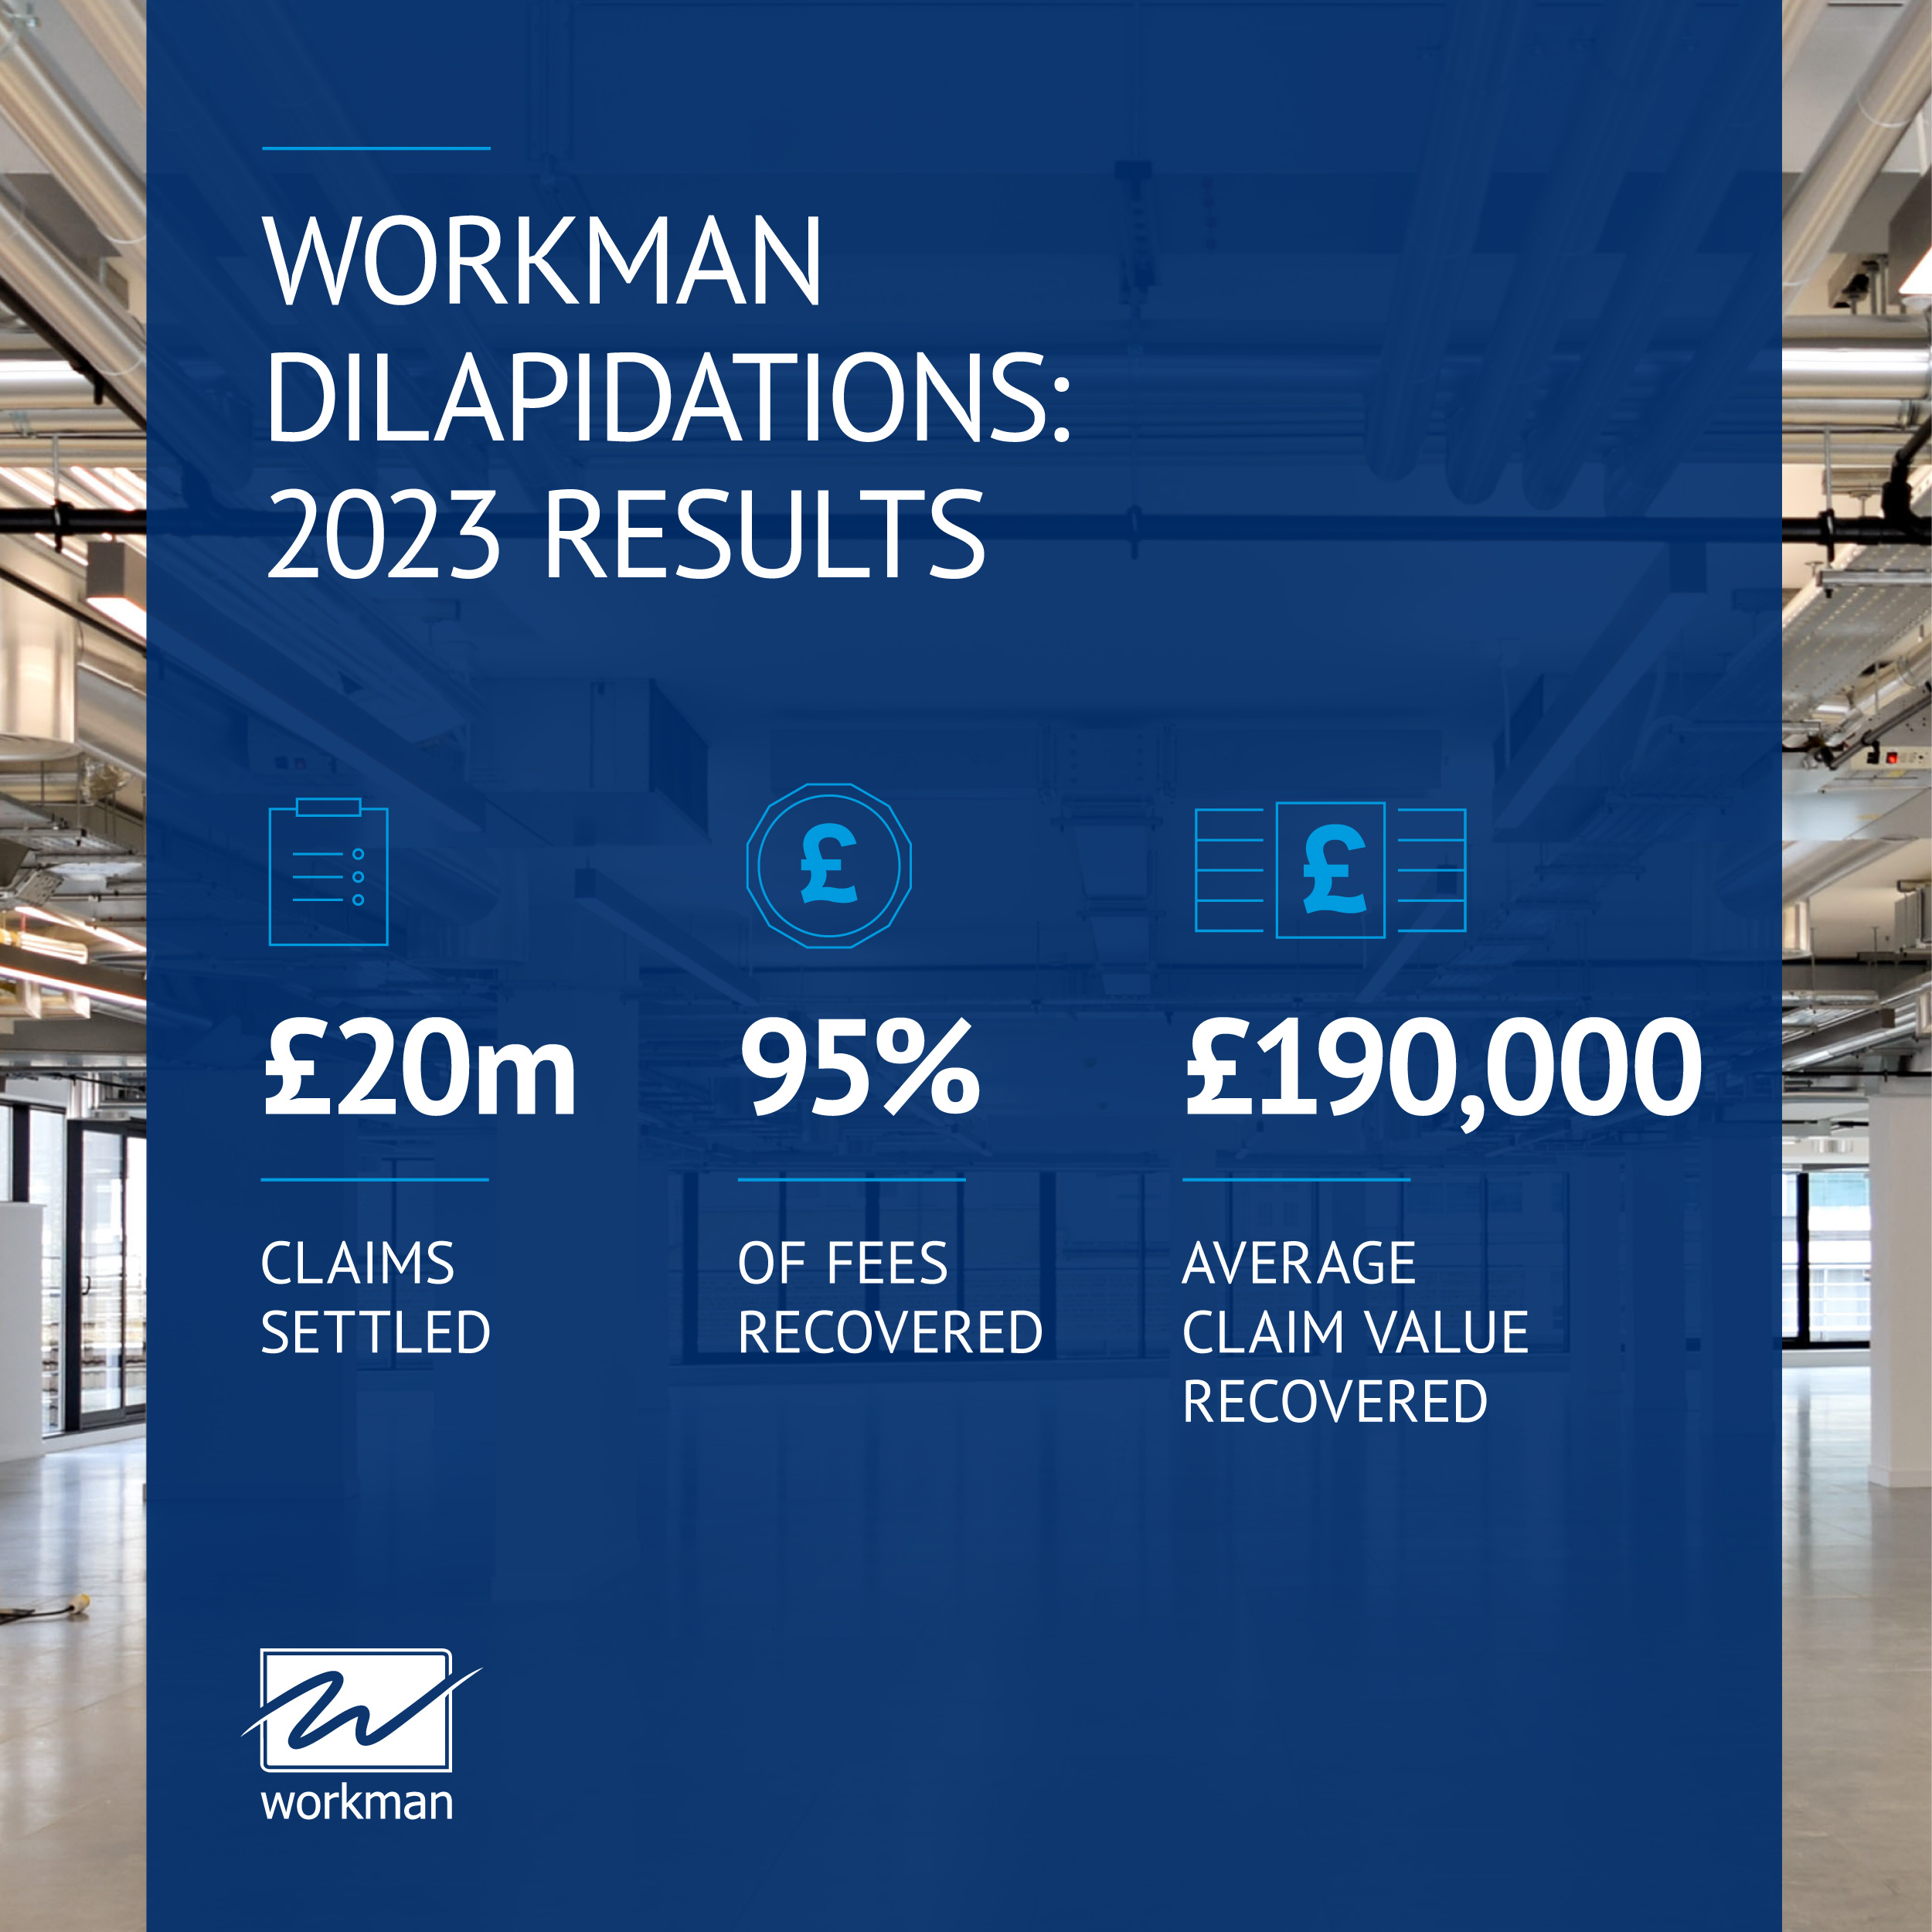 Workman Dilapidations 2023 results